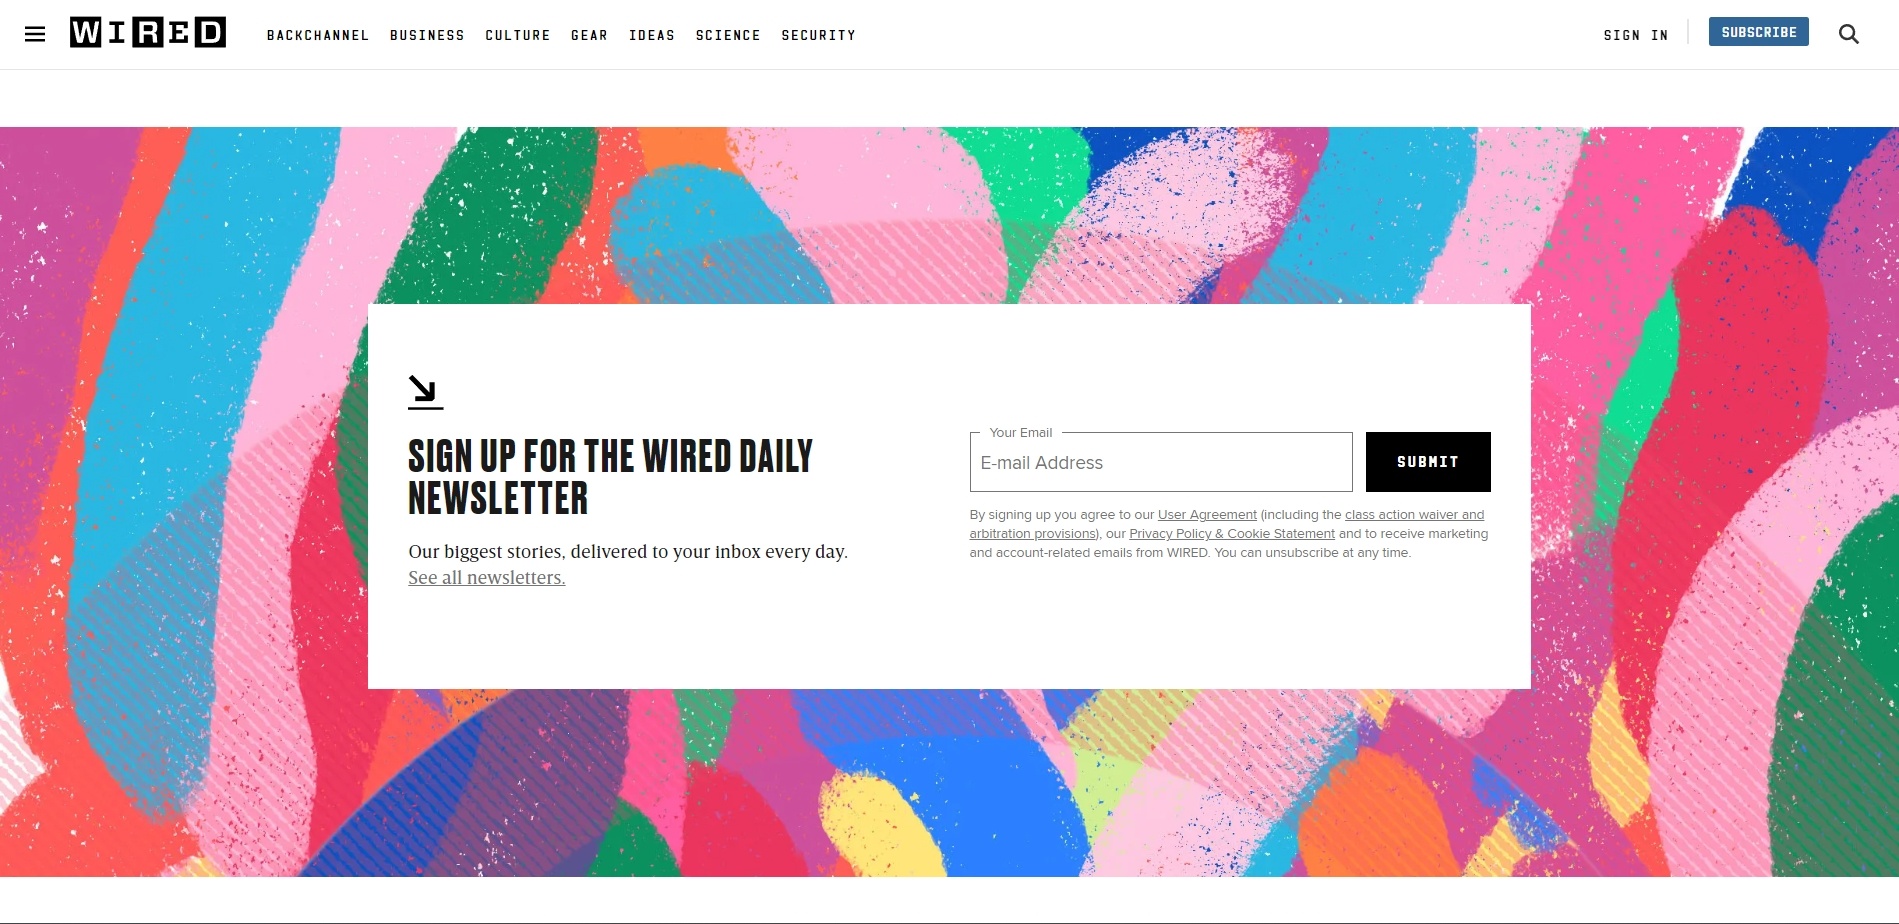 Wired has an email sign up offer to get their daily newsletter